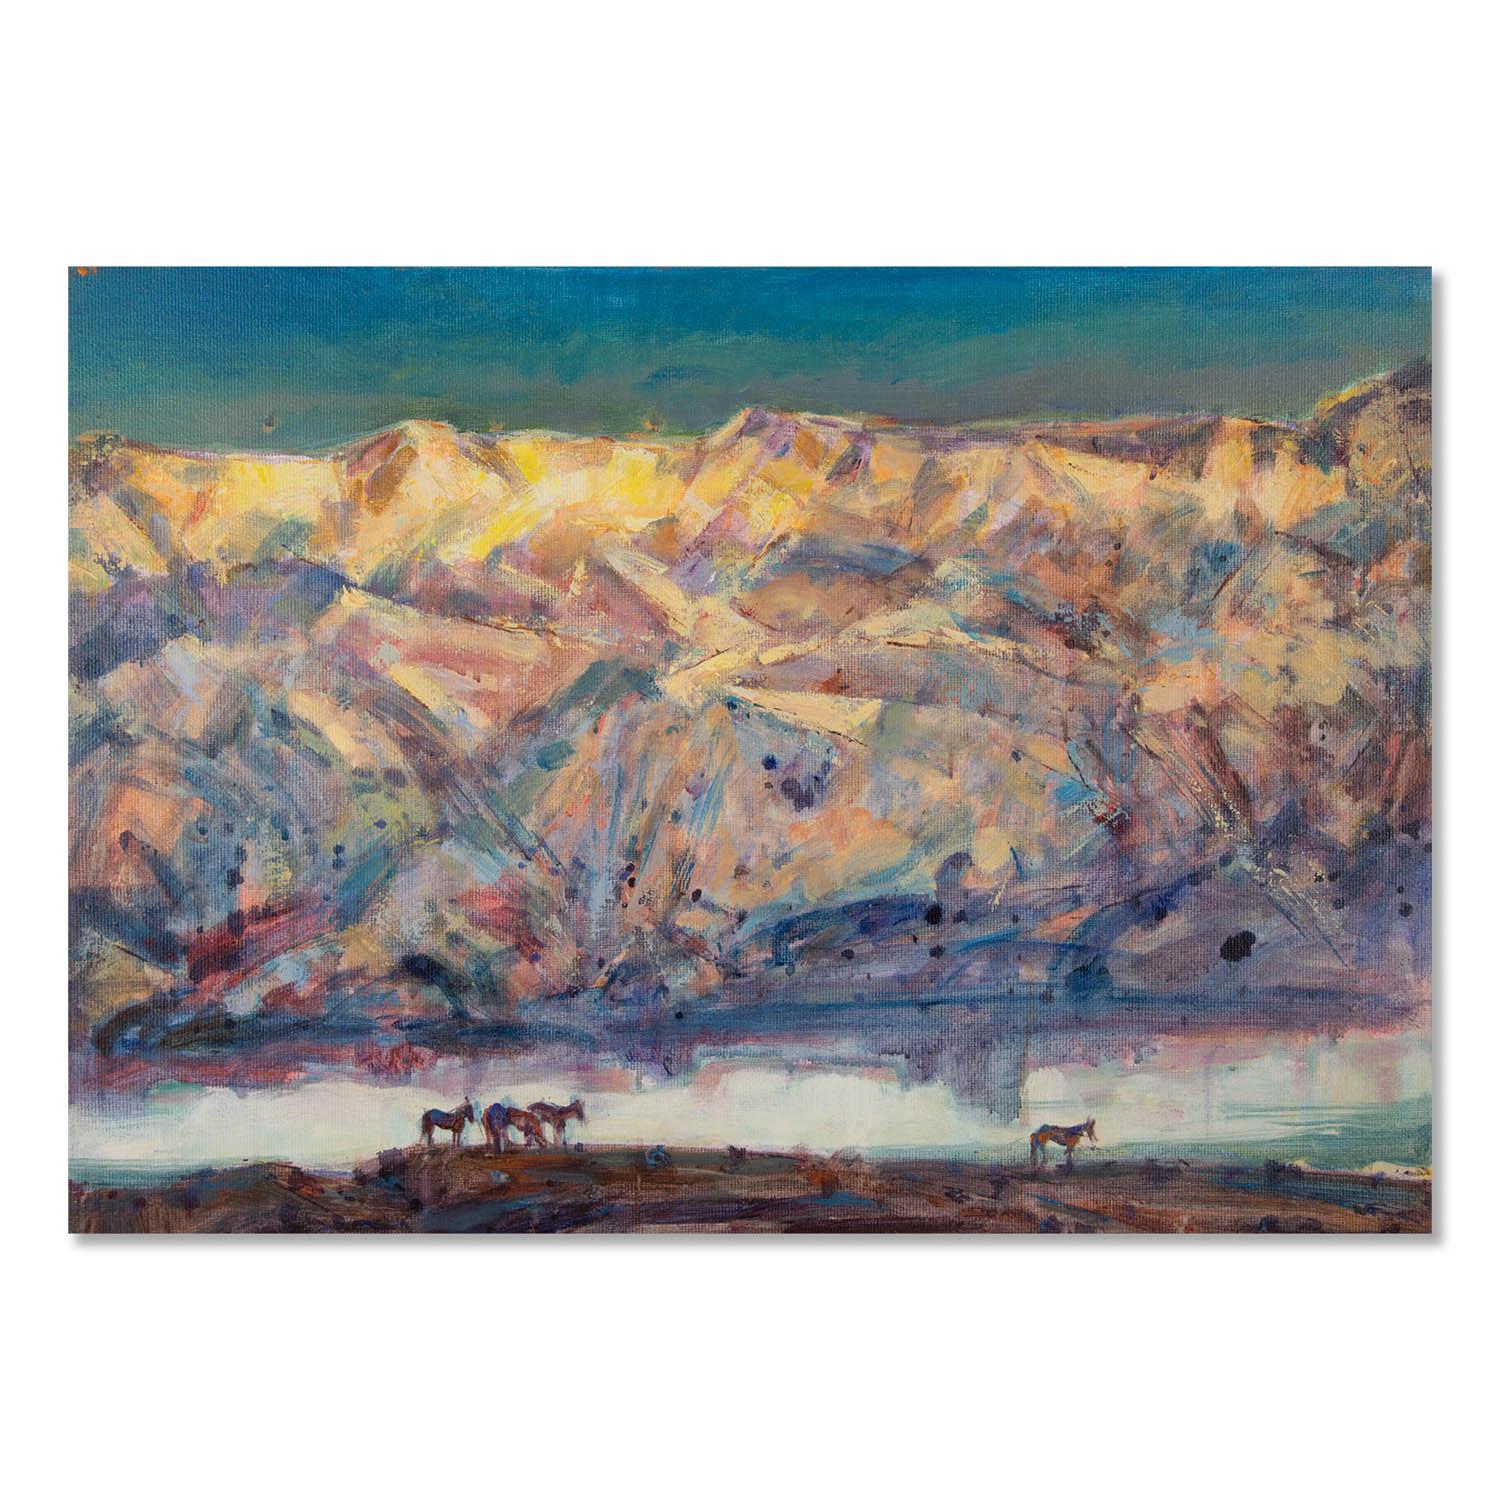  Title: Overlooking The Land 2
 Medium: Oil on canvas
 Size: 19 x 27 inches
 Frame: Framing options available!
 Condition: The painting appears to be in excellent condition.
 
 Year: 2000 Circa
 Artist: Zi Ding
 Signature: Signed
 Signature